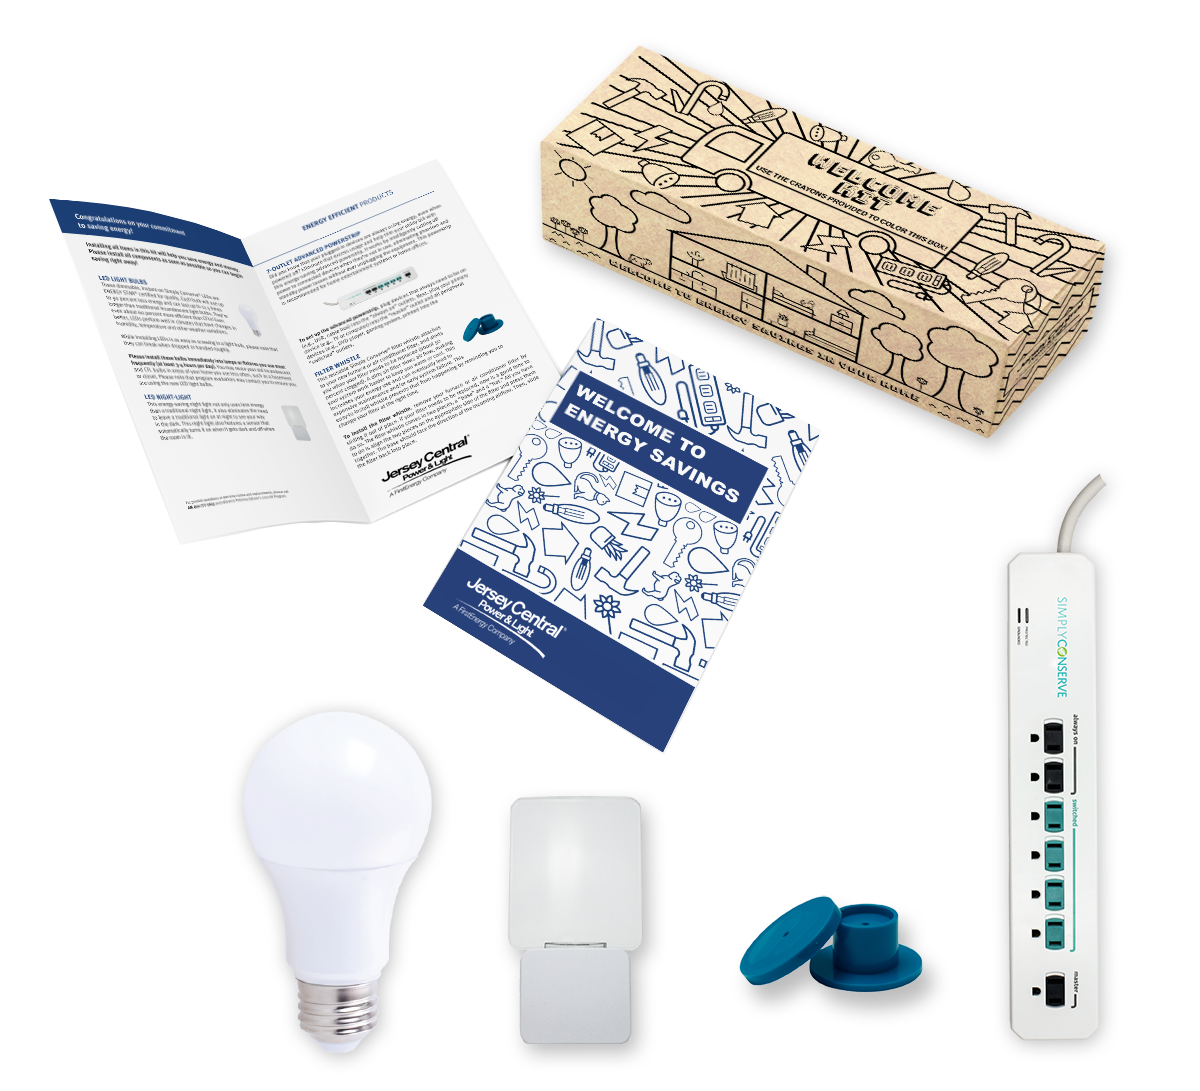 Free Energy Efficiency Kit Program for Jersey Central Power & Light Customers